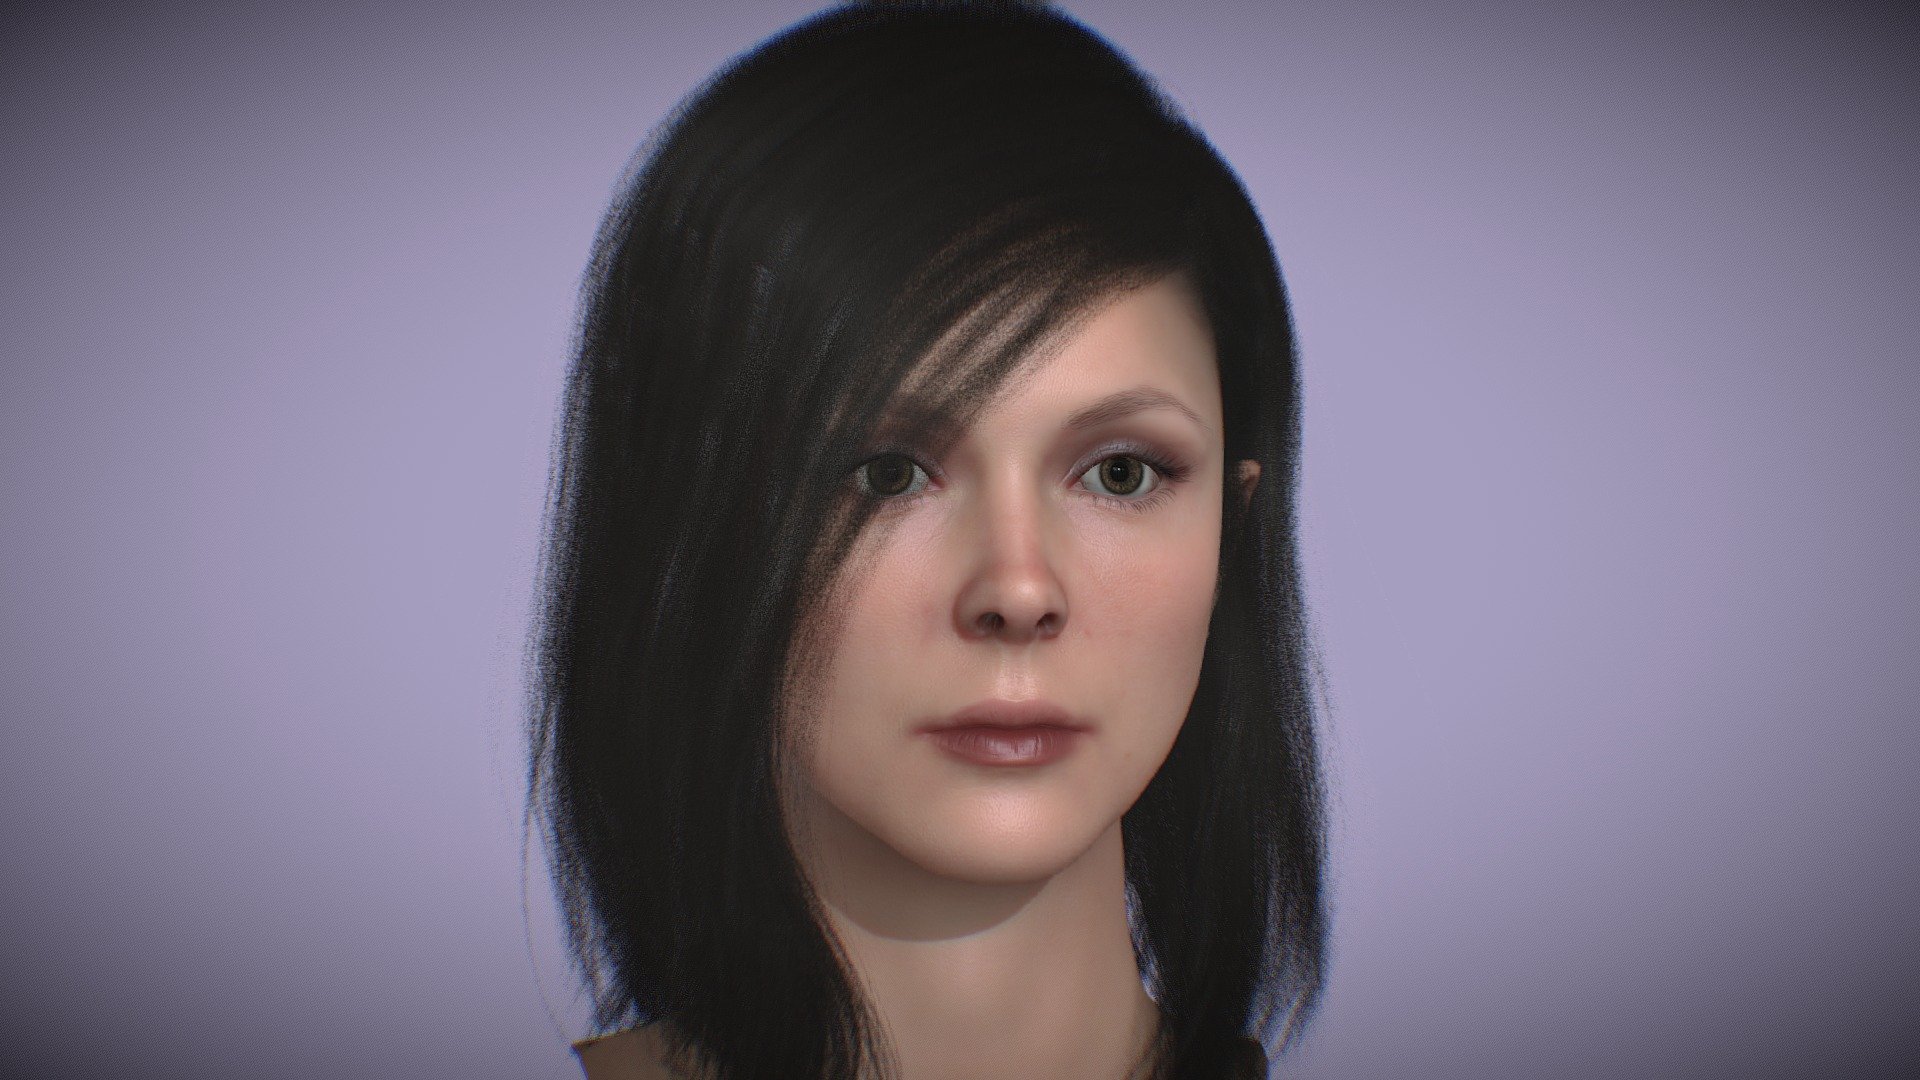 The realistic girl. To not miss the details, use the panel and click &ldquo;FullScreen